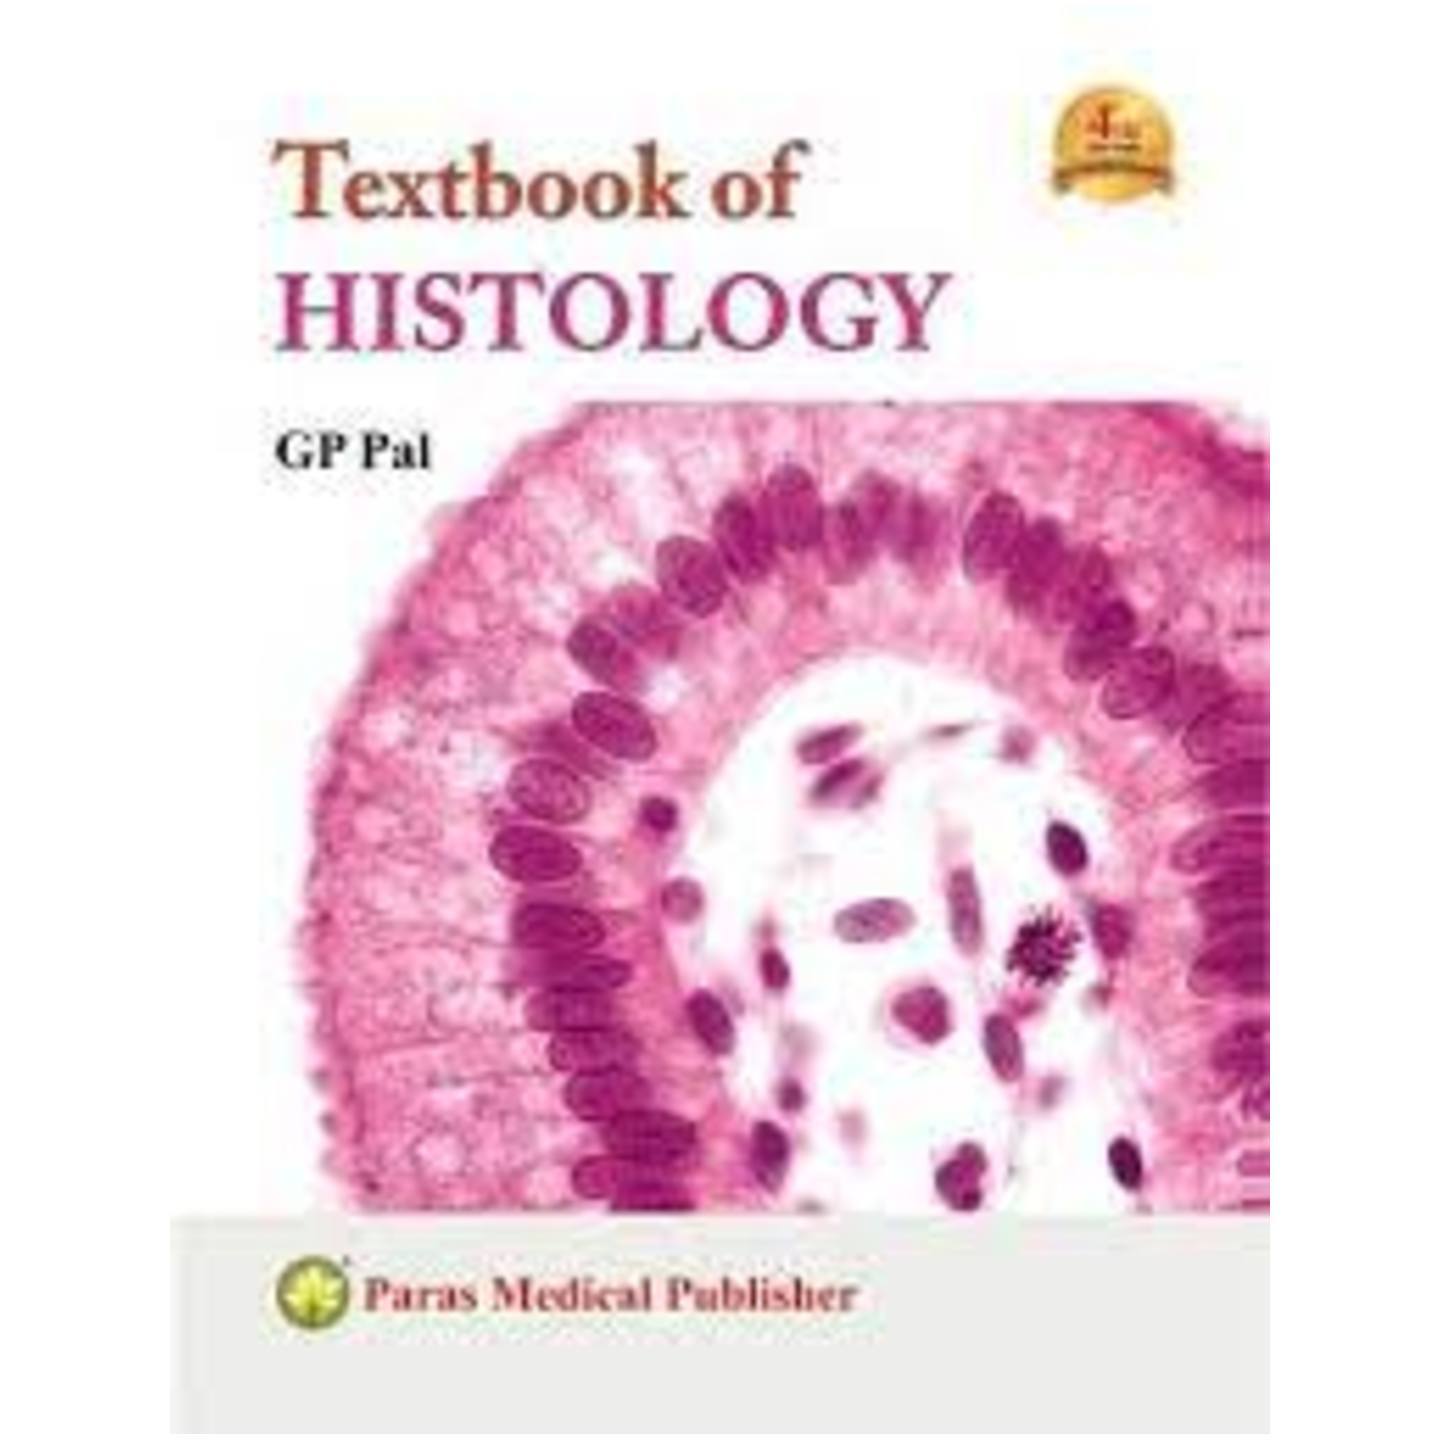 Textbook of Histology 4th Edition 2015  (English, Paperback, GP Pal)